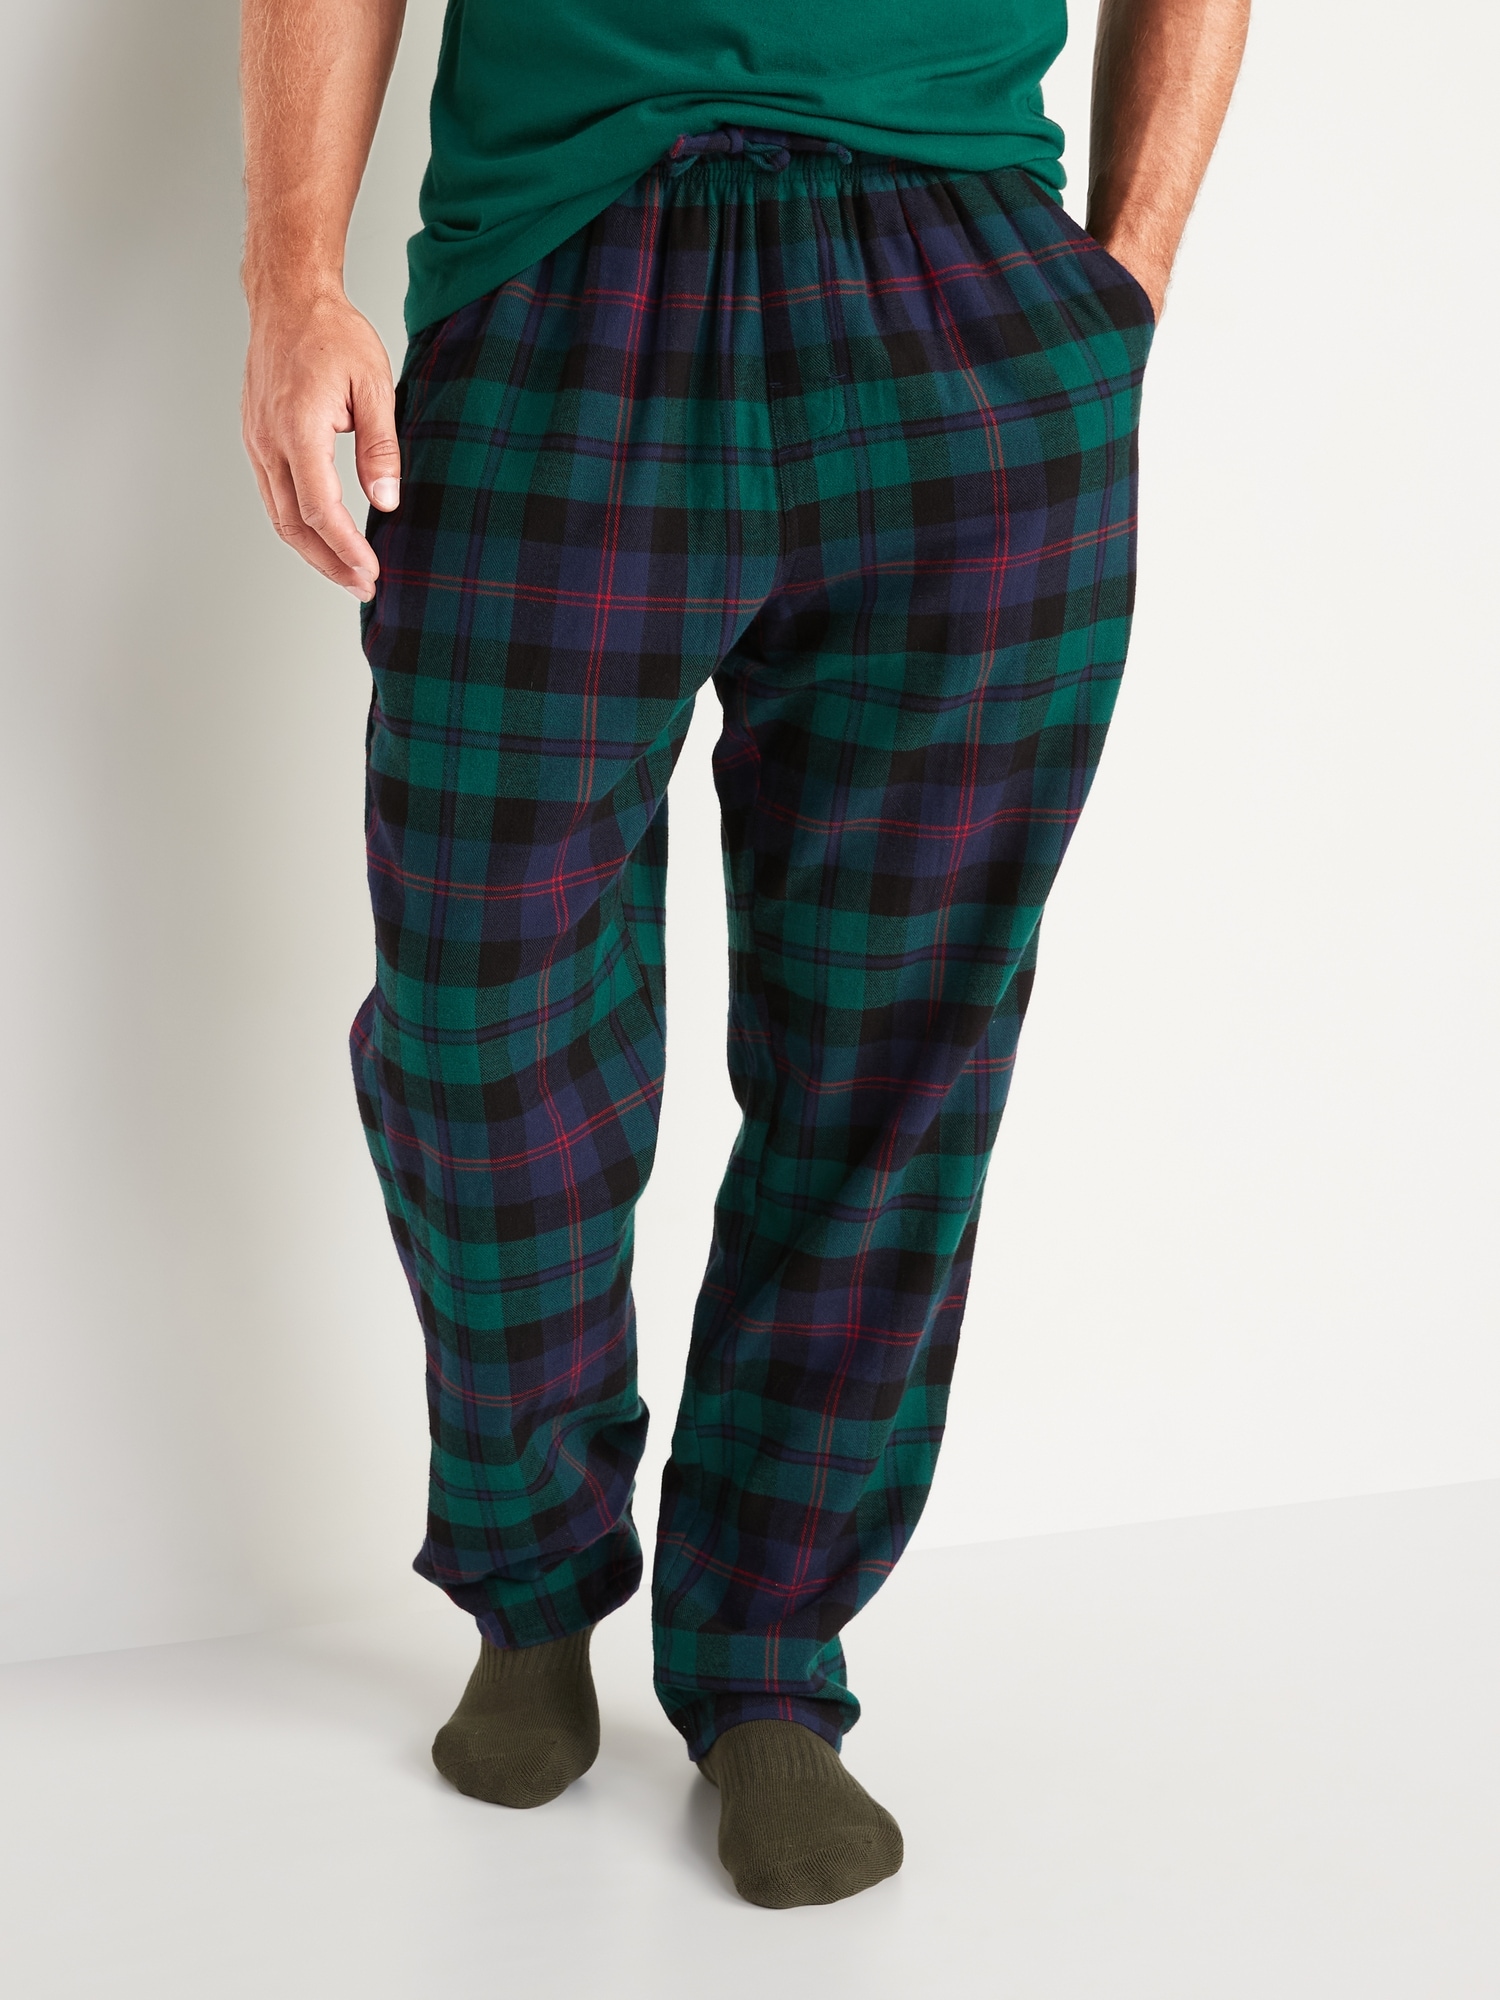 NWT: Men's Old Navy Plaid Flannel Pajama Pants, Red/Black, Size XL